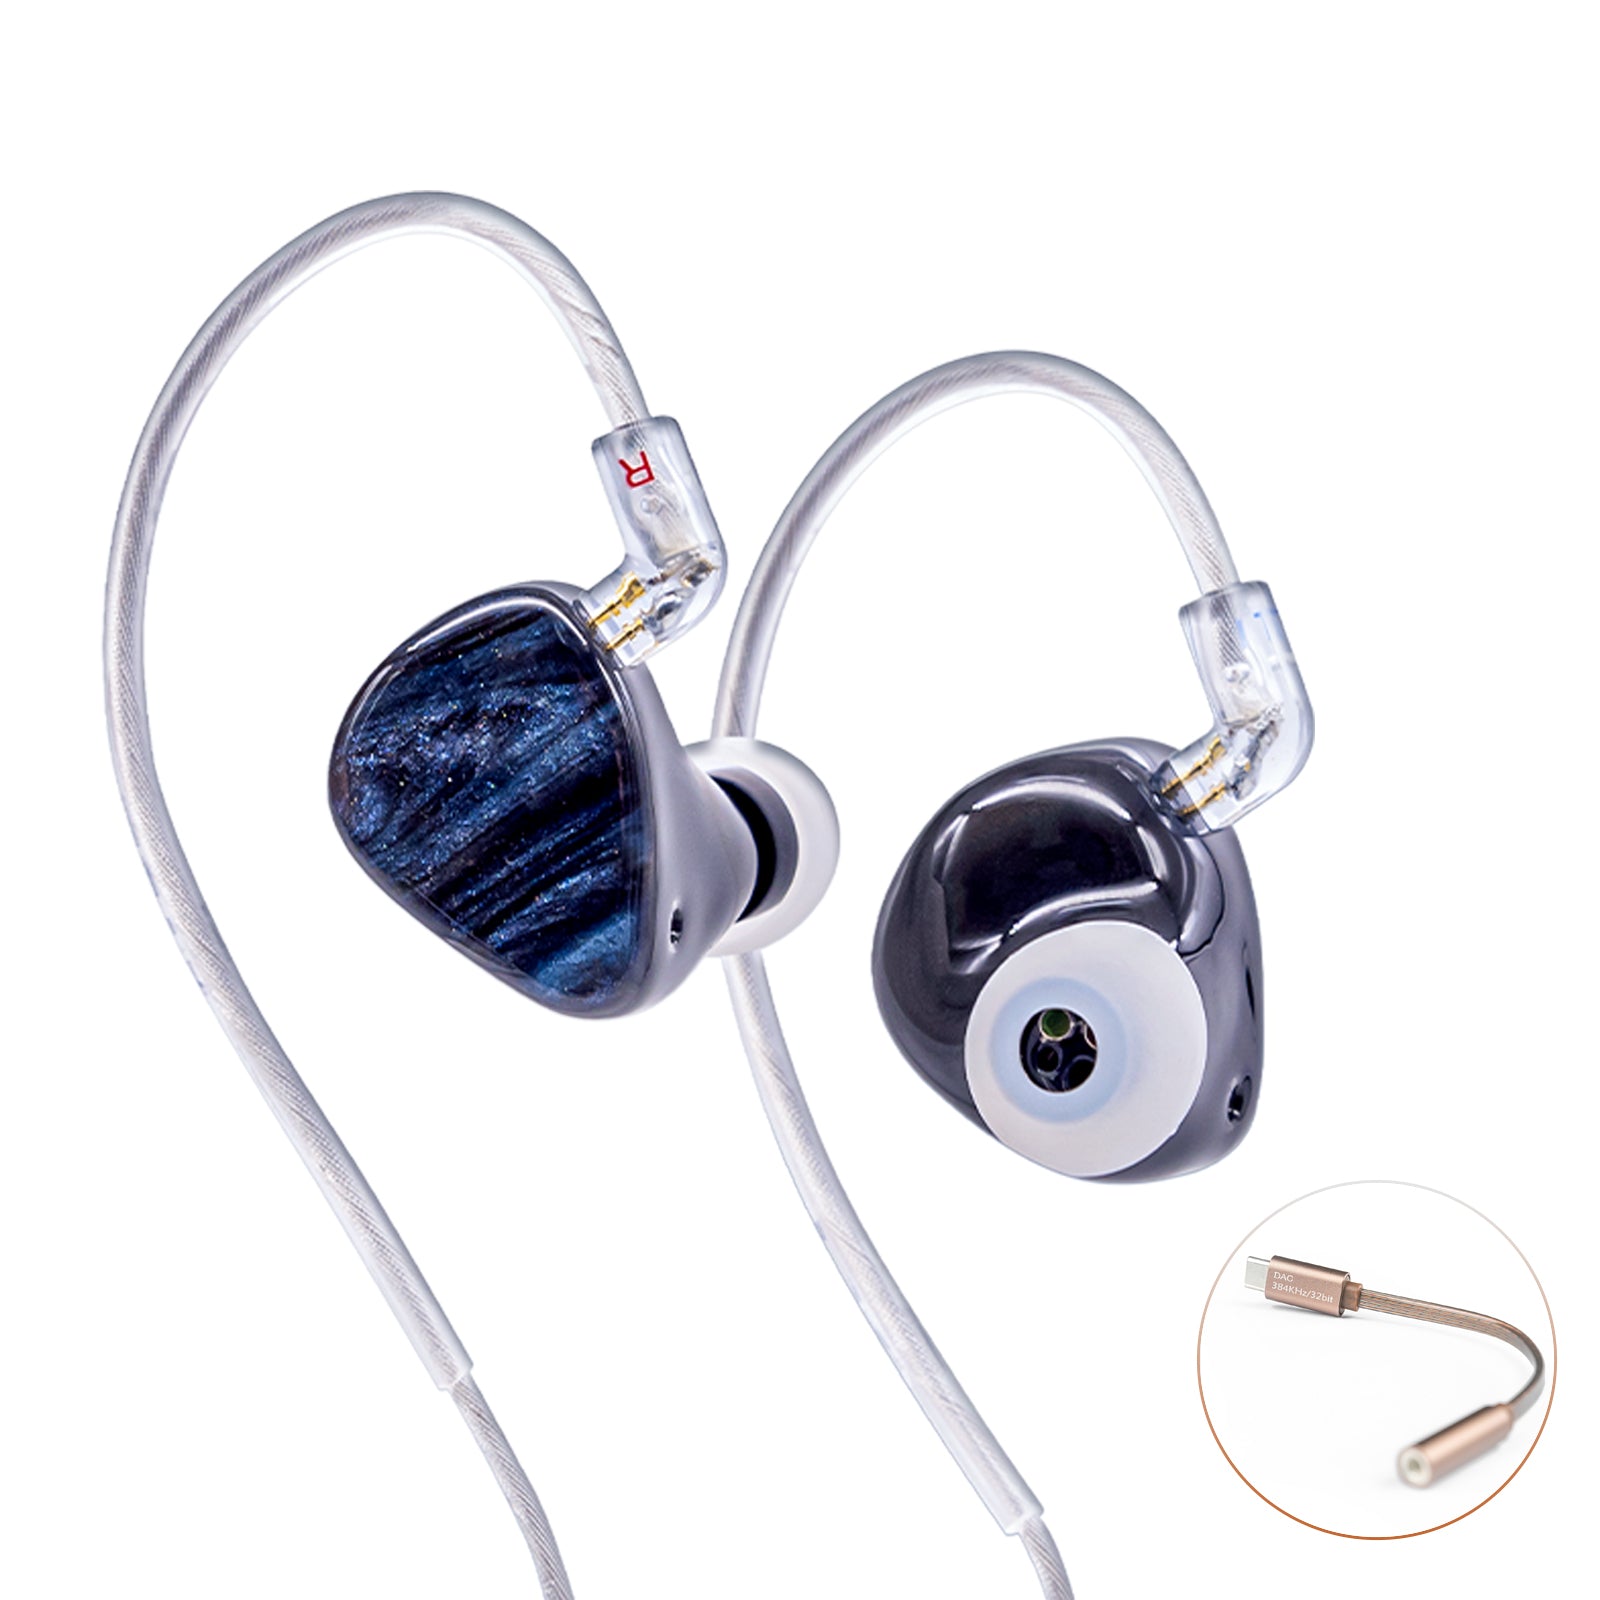 EJ09 - Best instrument in ear monitors, ultra-high resolution and details.